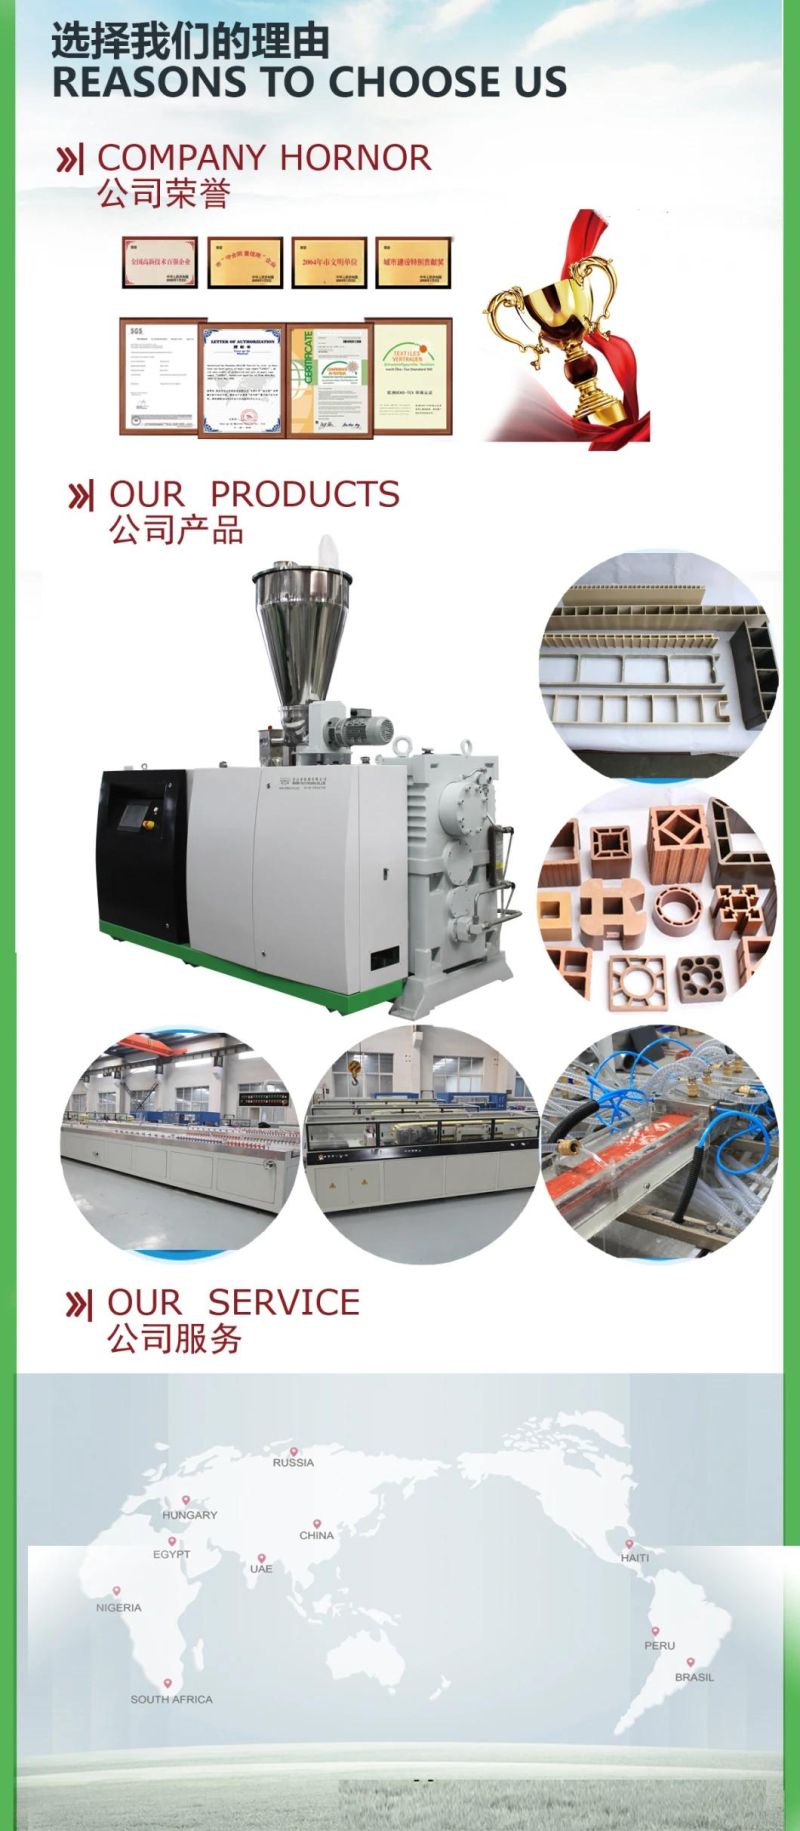 (Midtech Industry) Plastic HDPE/PE Ocean Marine Pedal Hollow Board Extrusion/Extruder Making Machinery